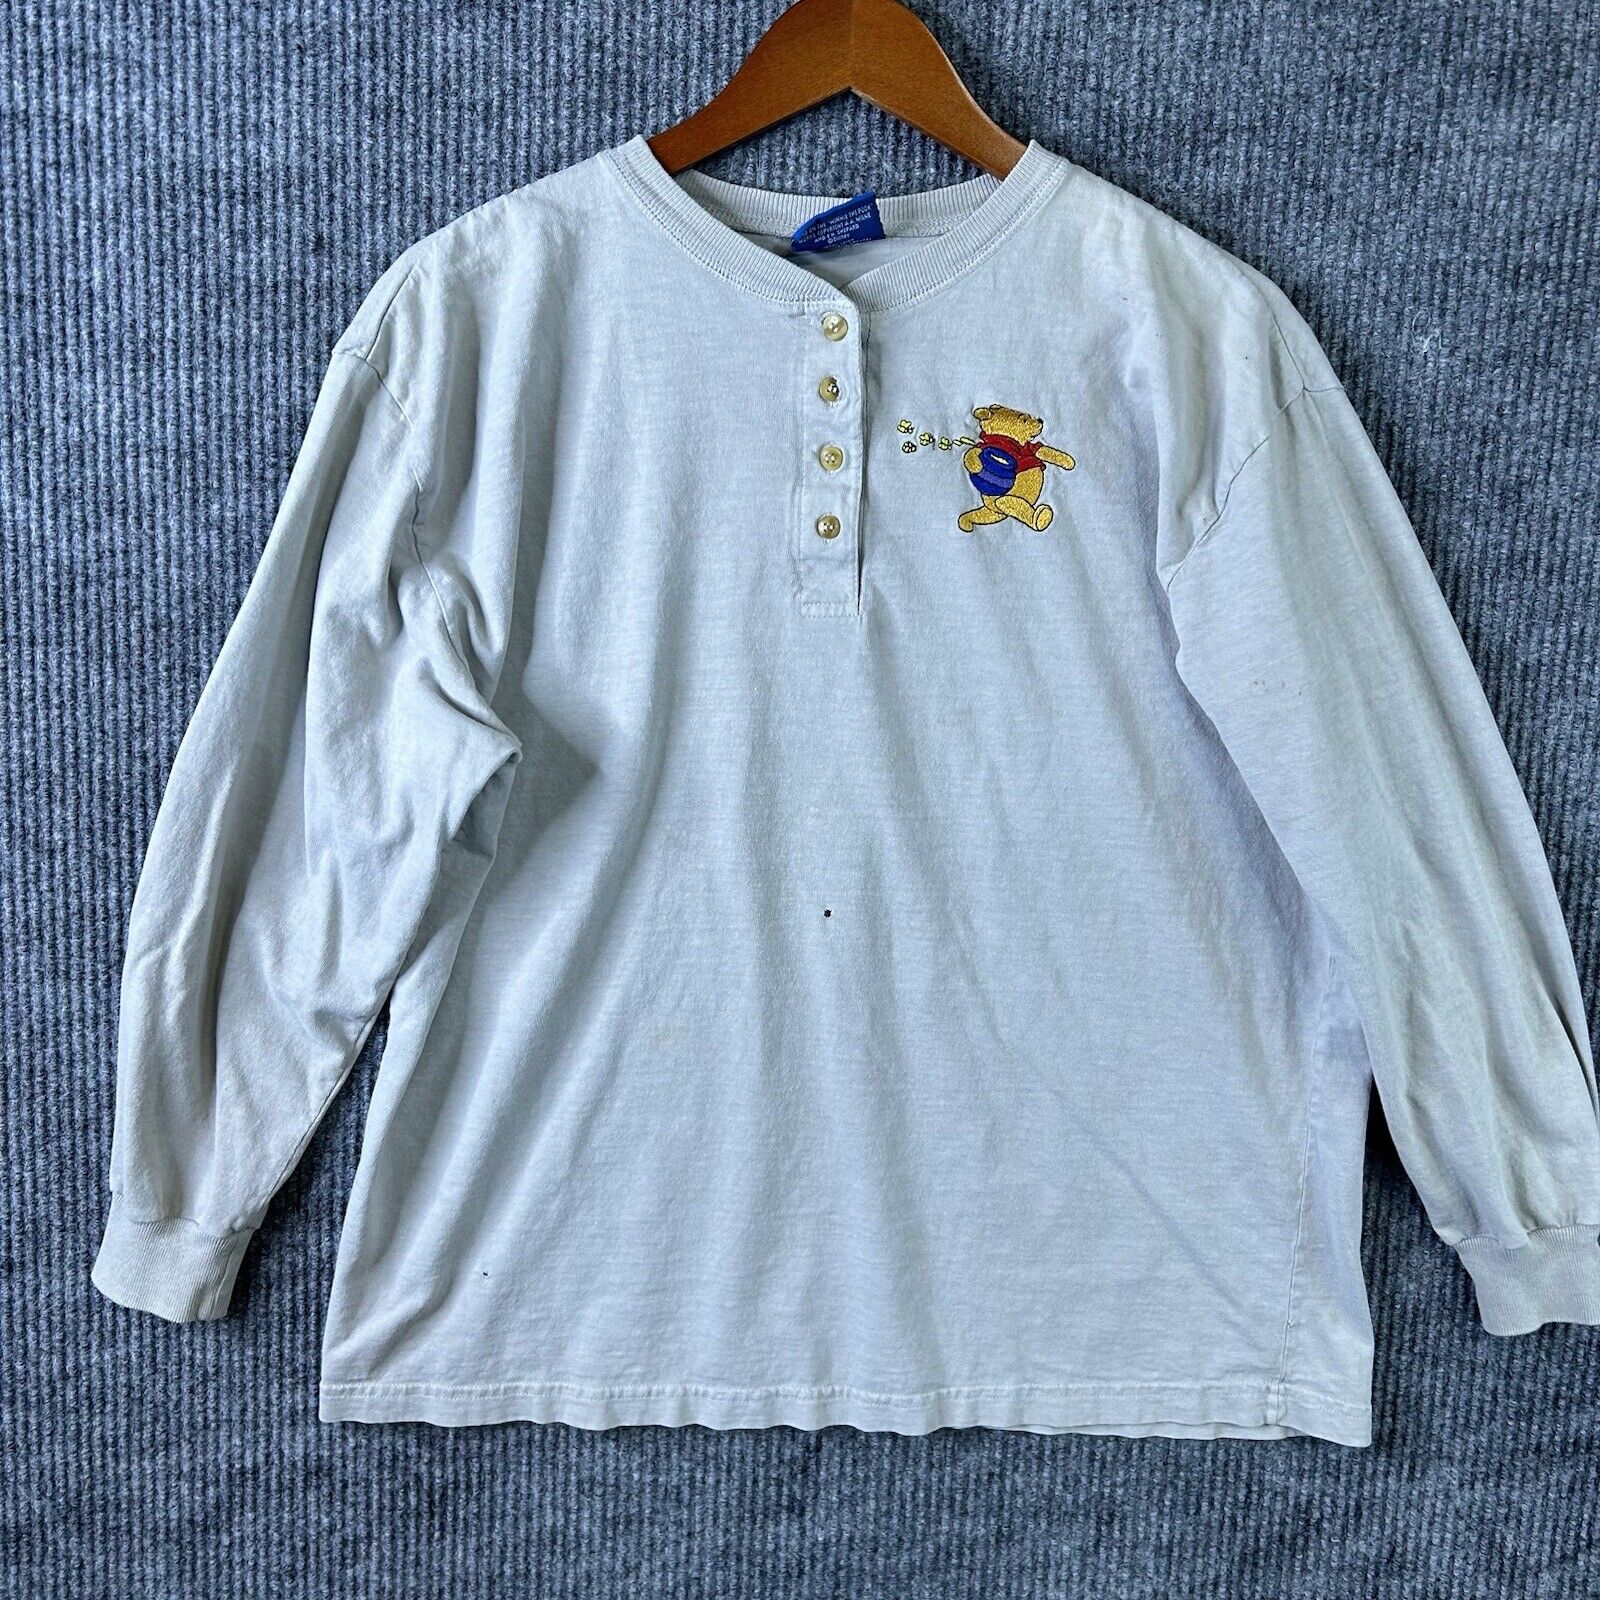 Vintage Disney Winnie The Pooh Long Sleeve Henley Shirt Adult Large Embroidered